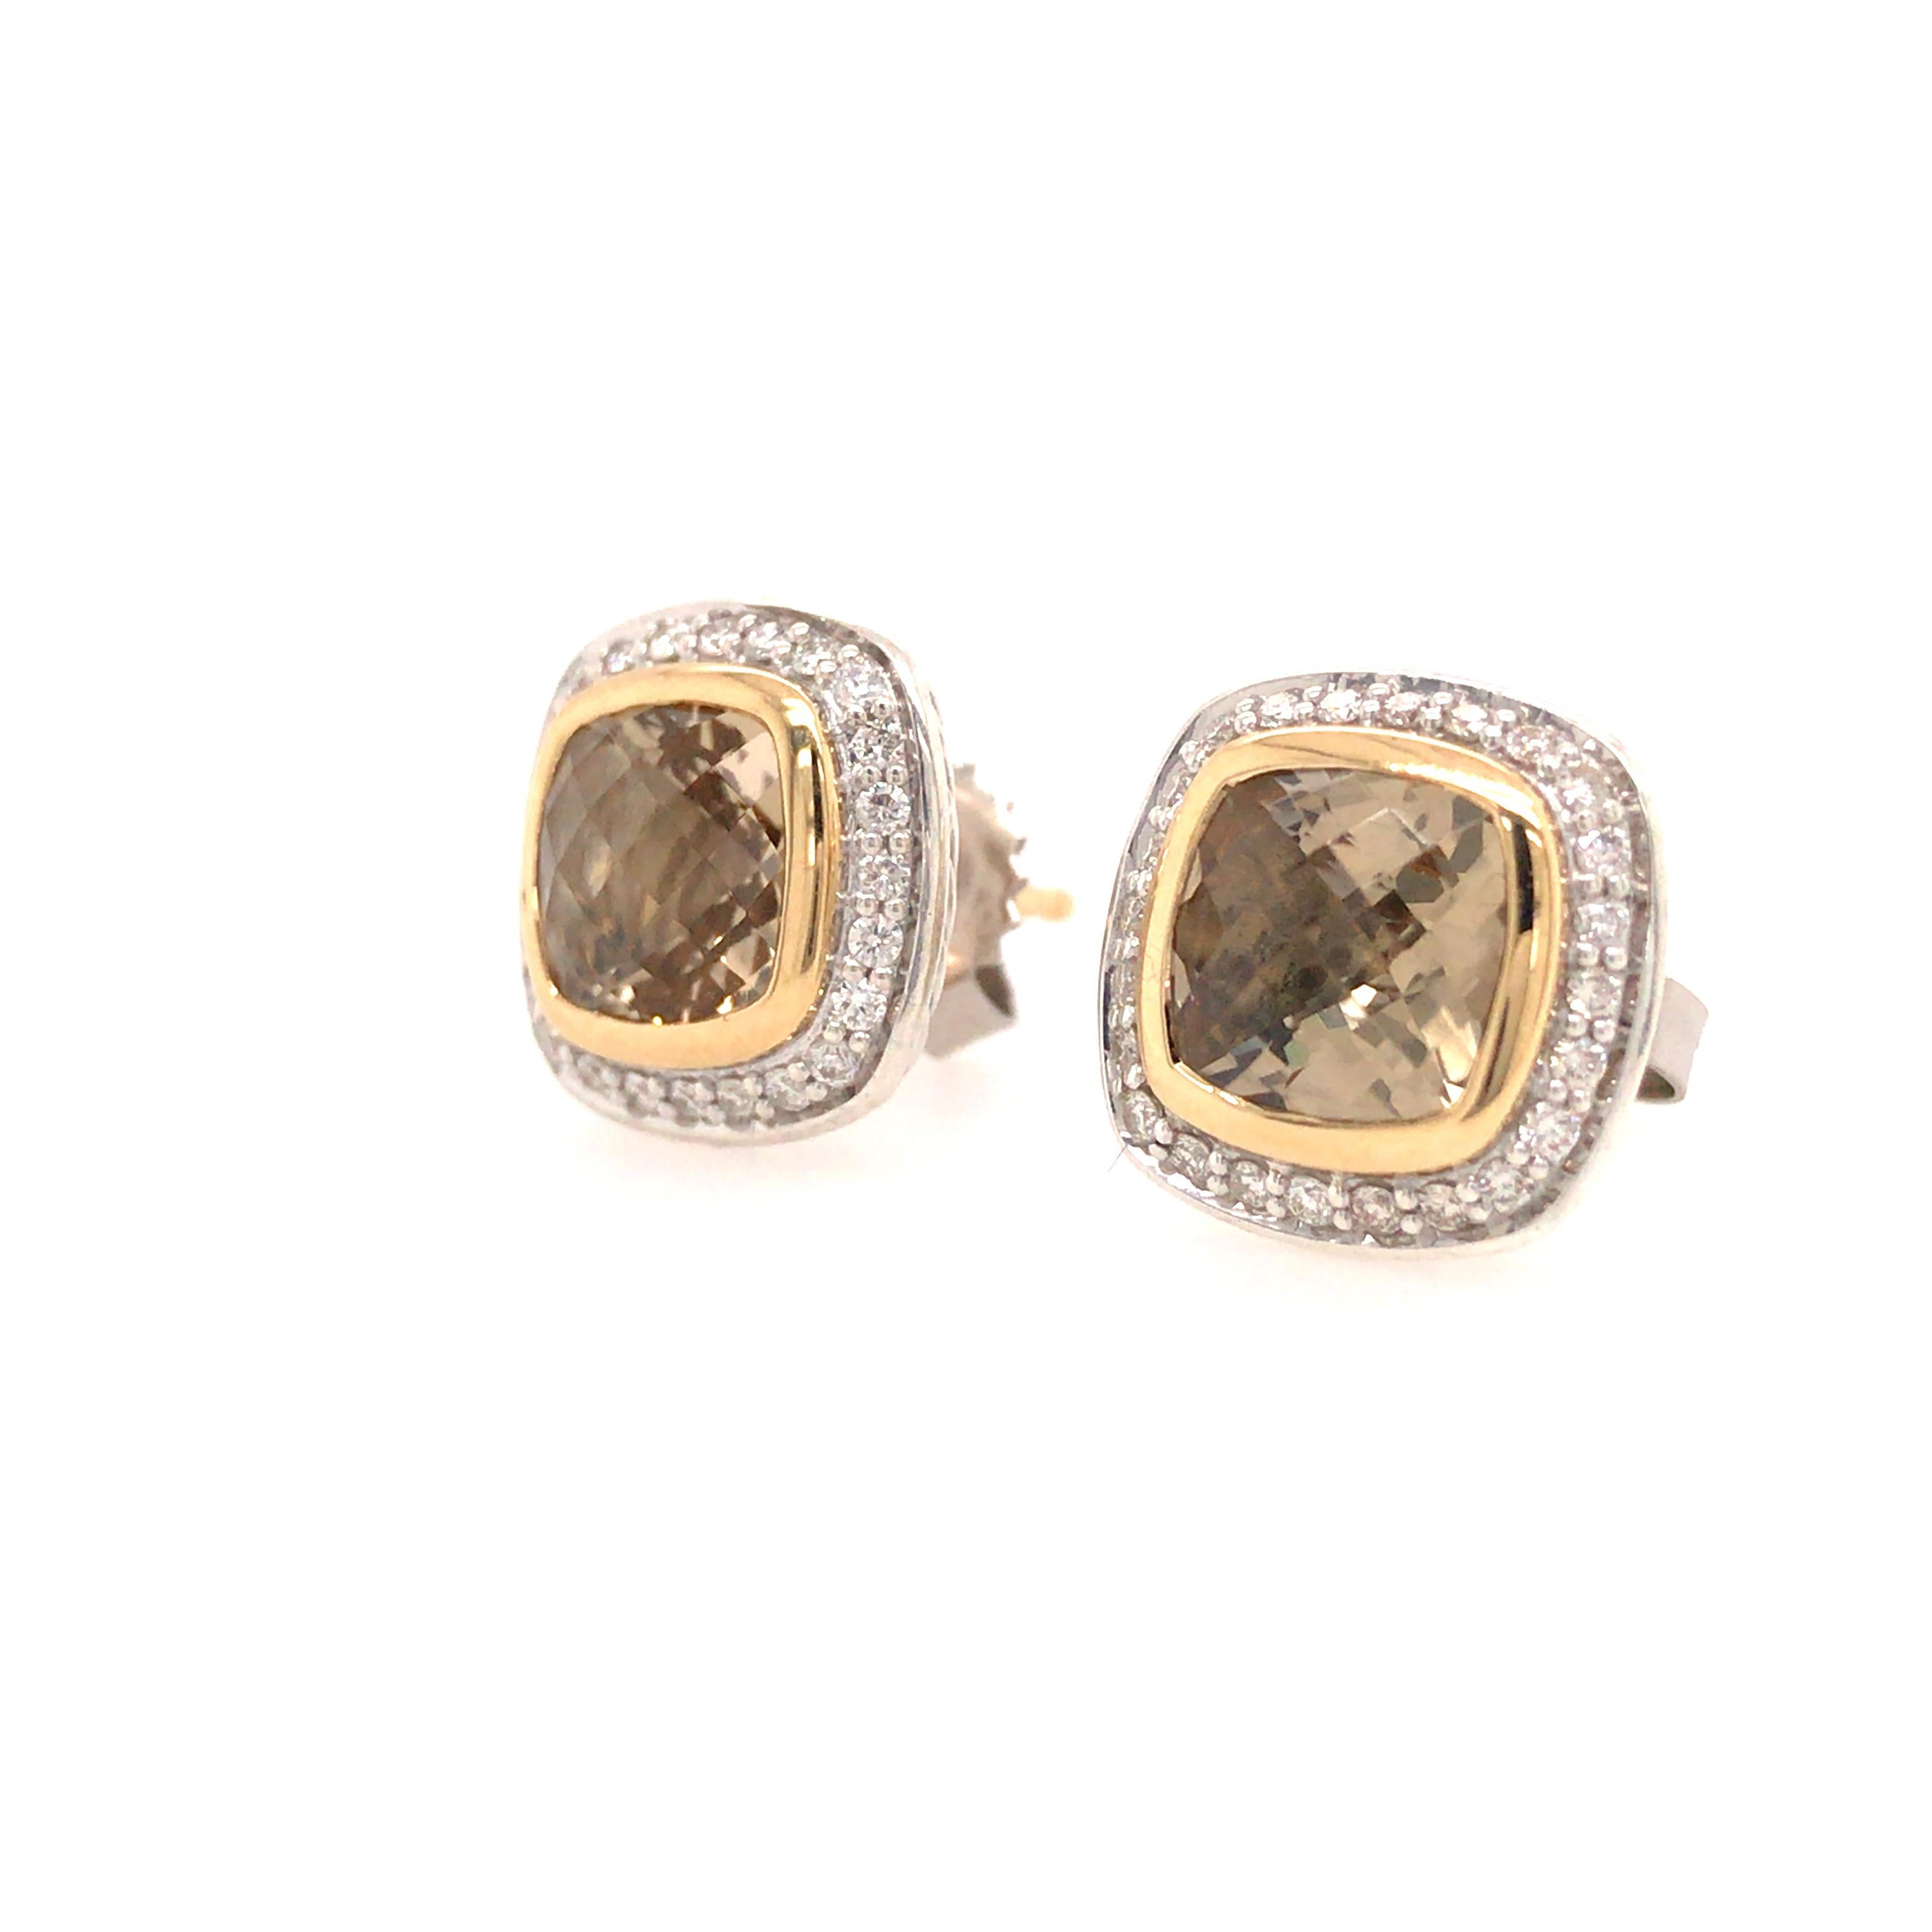 David Yurman Citrine and Diamond Earring in 18K Yellow Gold and Sterling Silver.  Round Brilliant Cut Diamonds weighing .24 carat total weight, G-H in color and VS-SI in clarity are expertly set.  The Earrings measure 1/2 inch in length and width. 